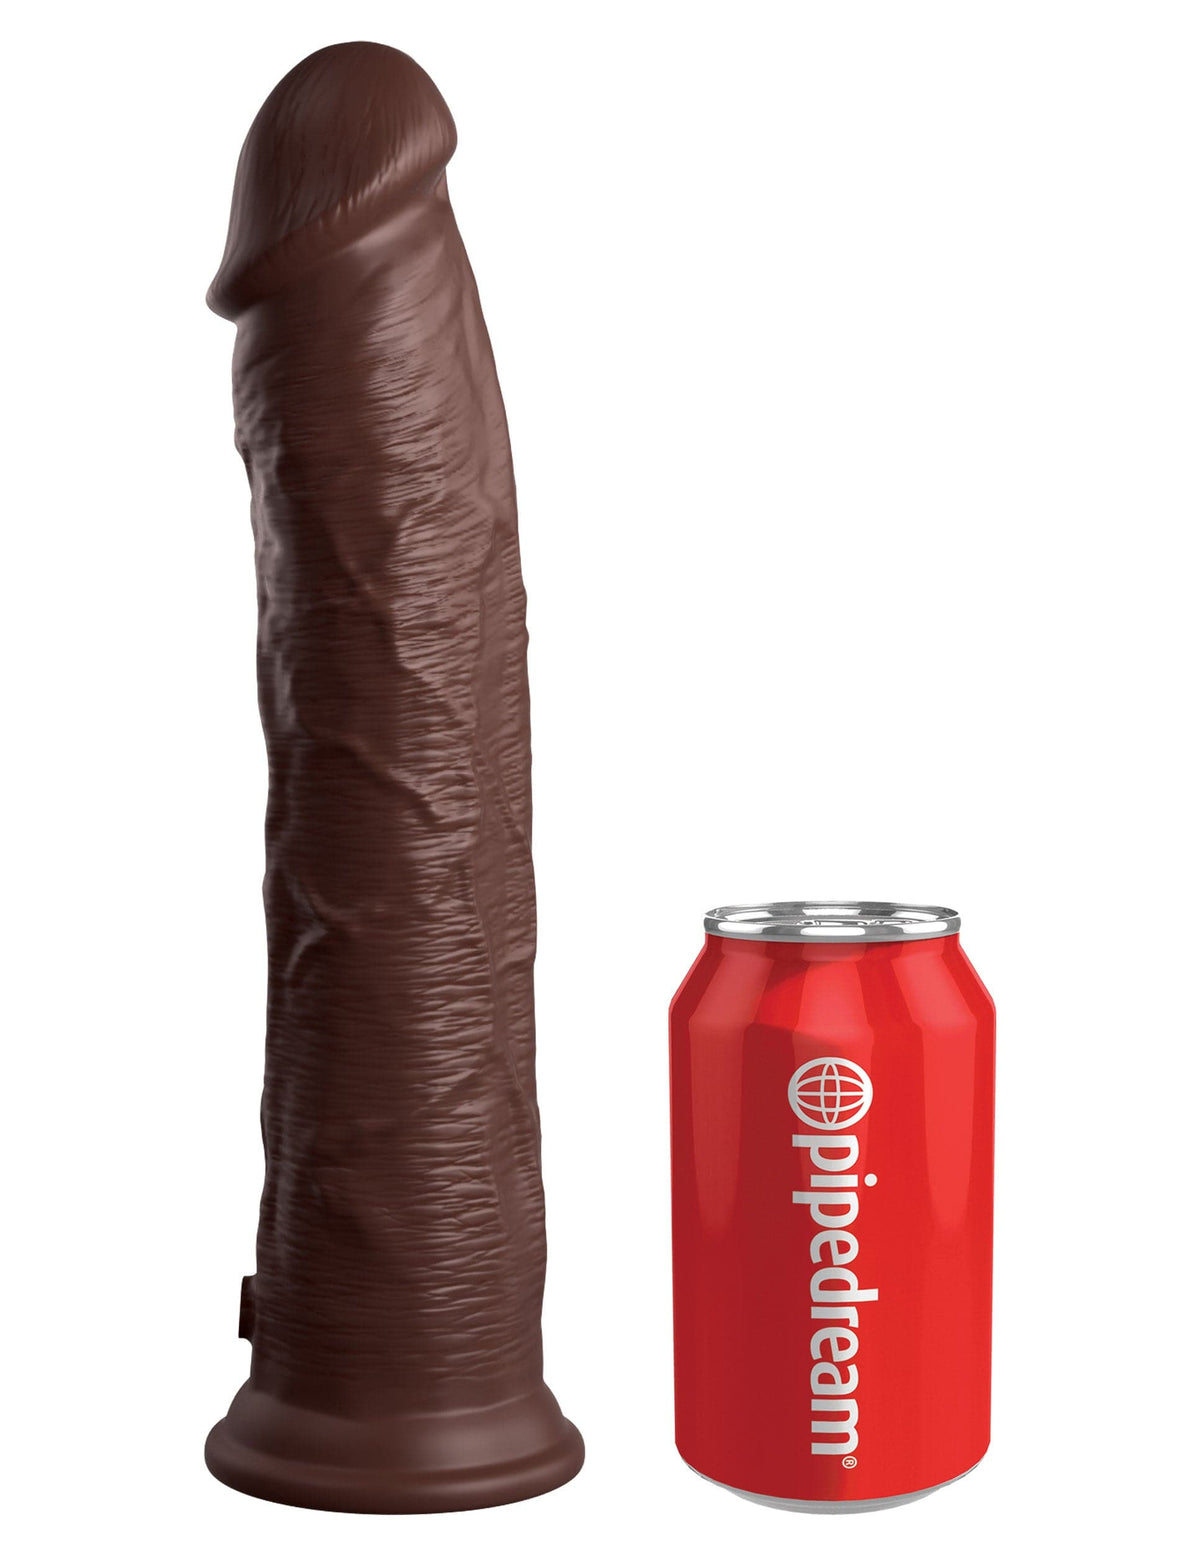 king cock elite 11 inch silicone dual density cock brown